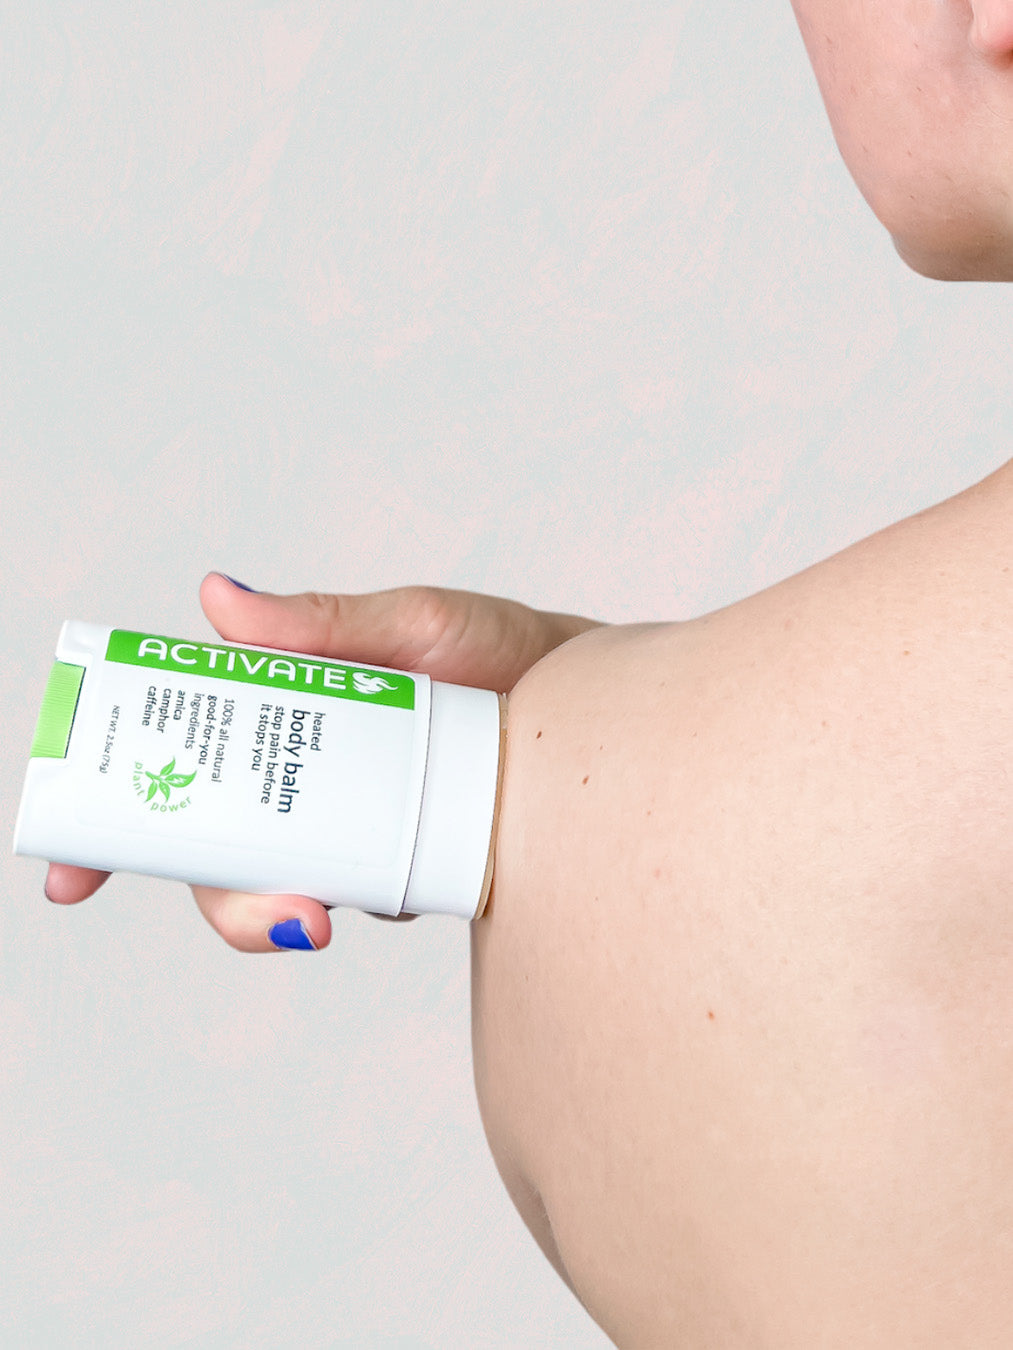 caucasian female applying a green and white product titled "activate pain relief body balm" onto left shoulder prior to activity to prevent further injury.